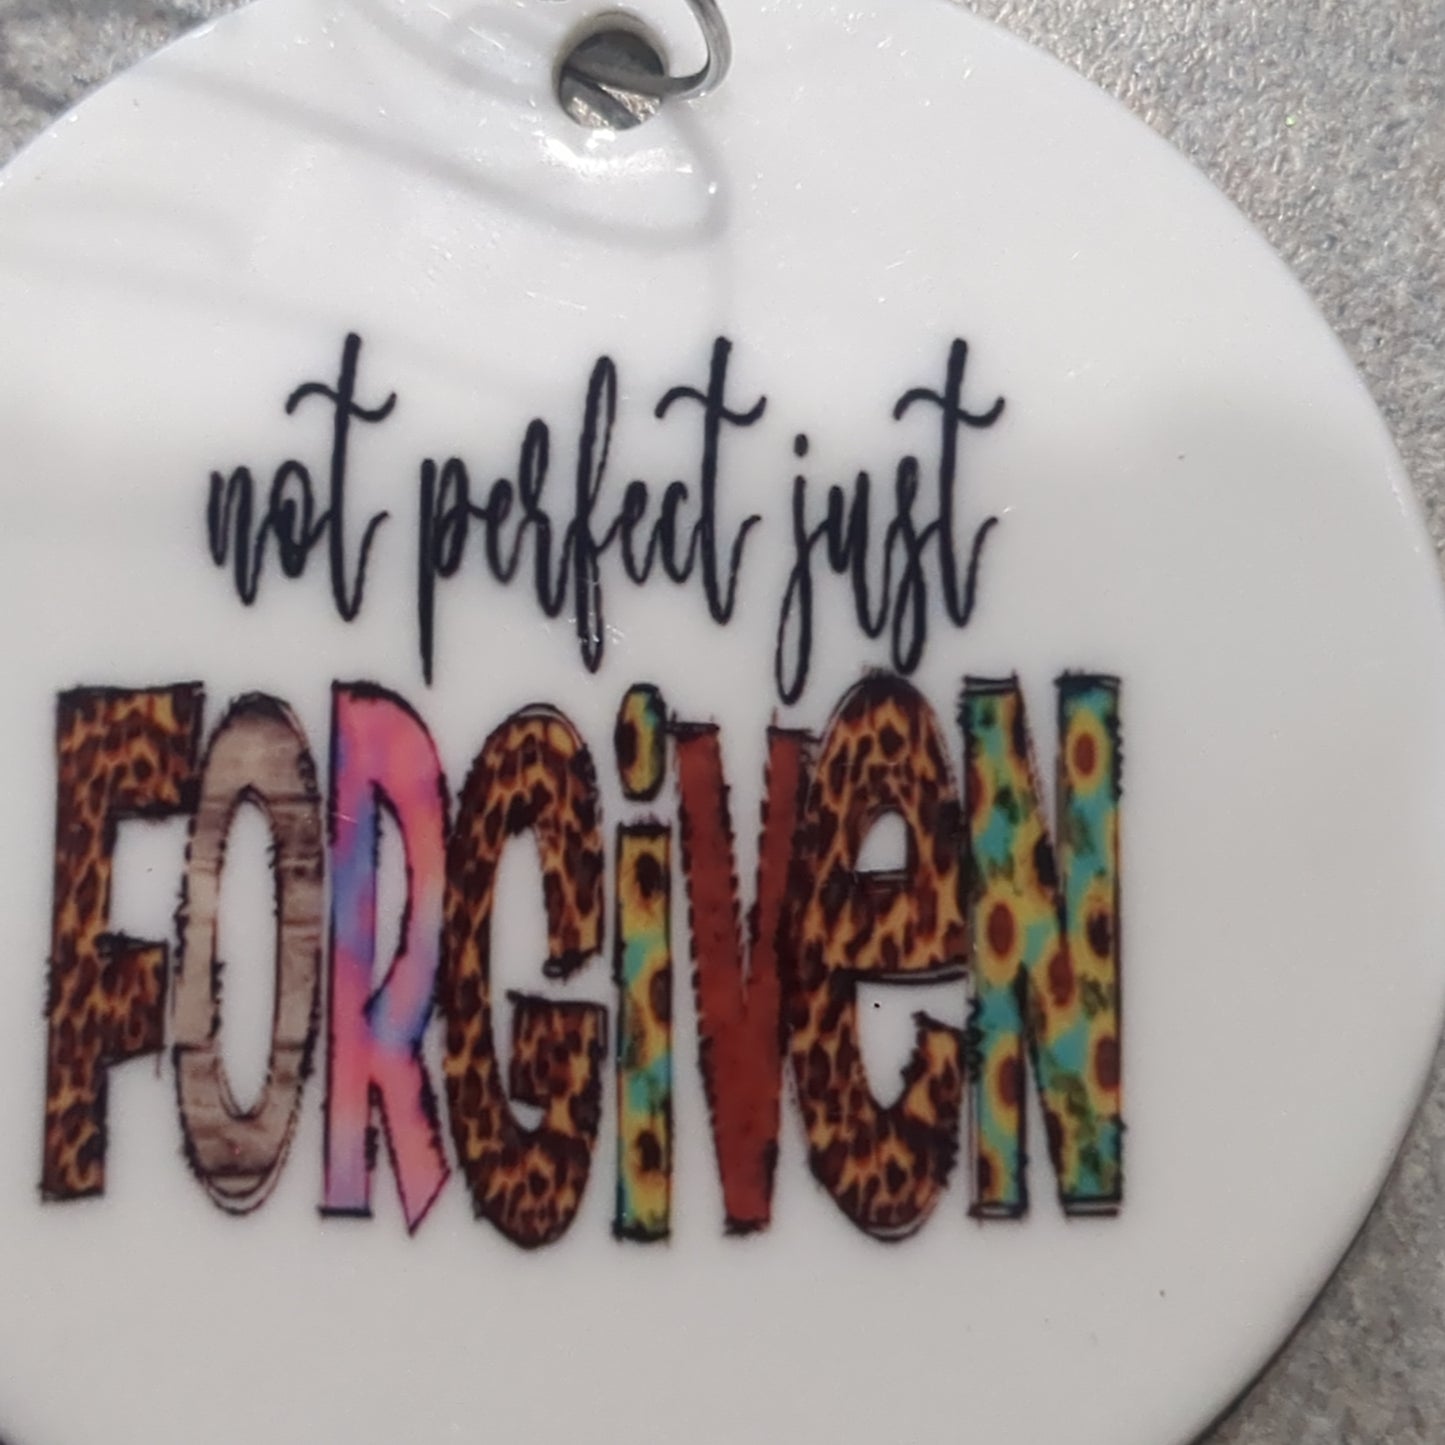 Ceramic ornament with The words not perfect just forgiven